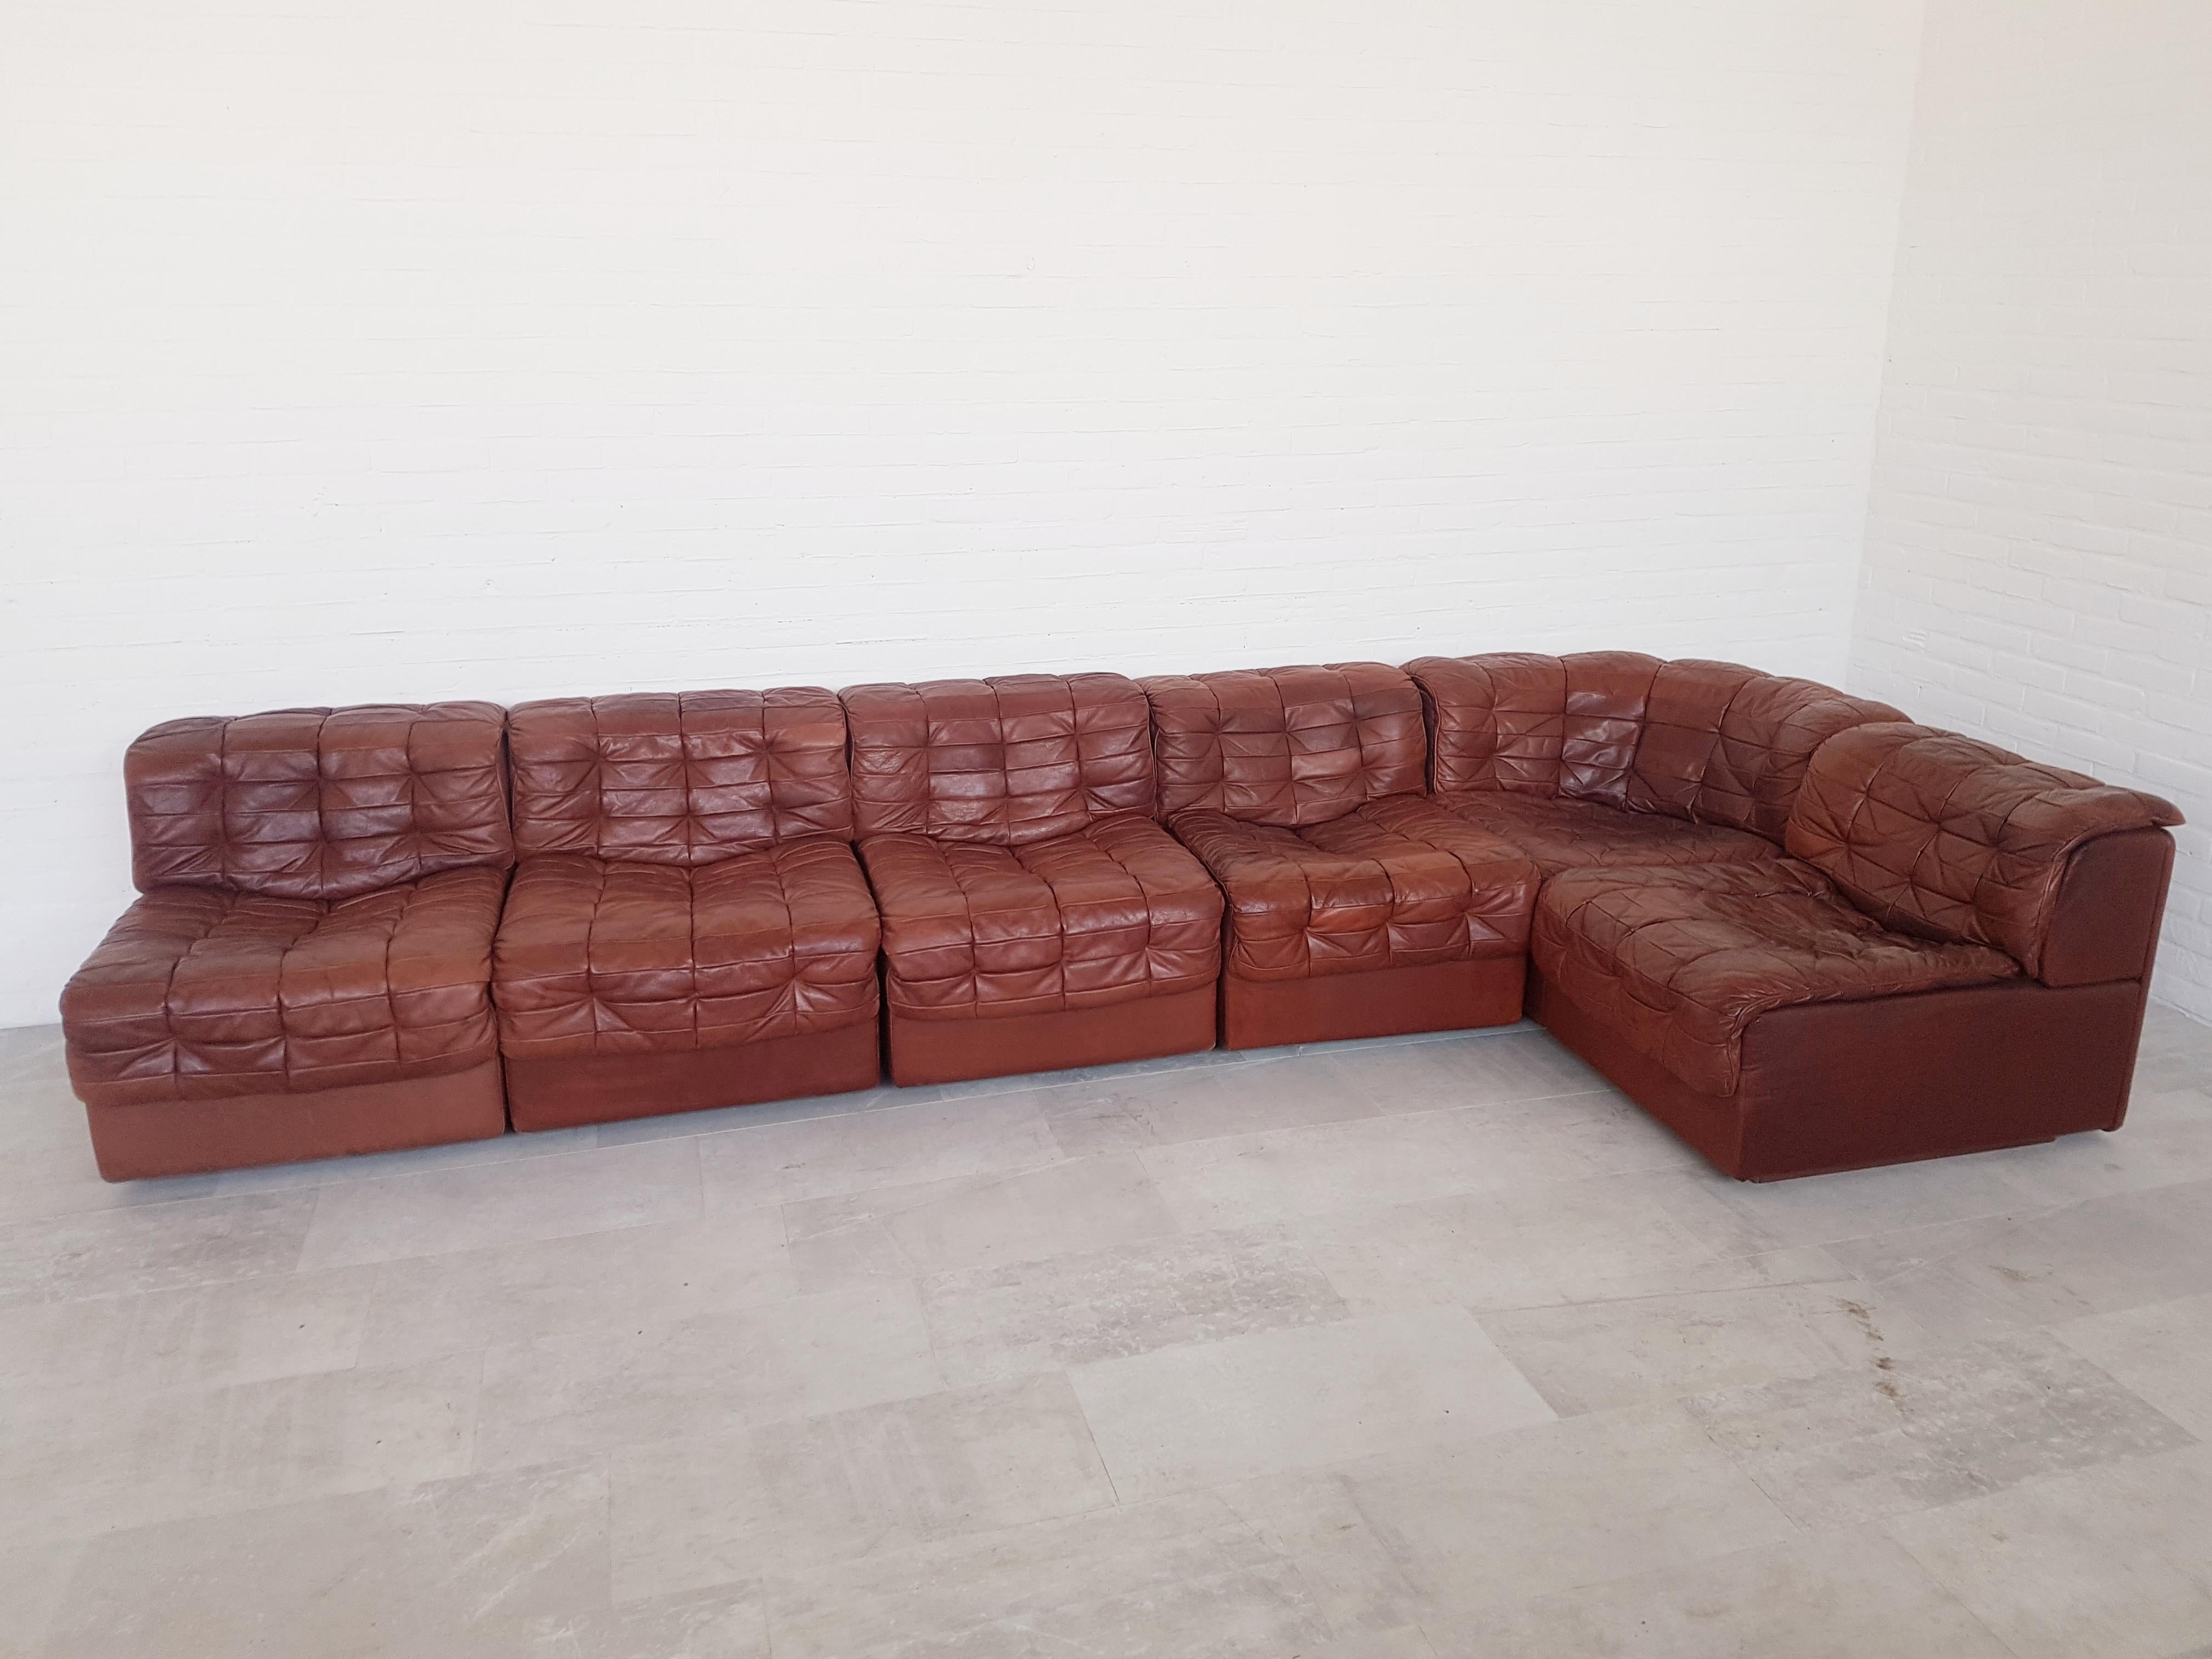 De Sede Switzerland, the world's leading manufacturer of luxury leather seating, made this modular sectional sofa in the 1970s.
Whiskey or terracotta colored patchwork leather upholstery in great original patina.
Mid-Century Modern piece that